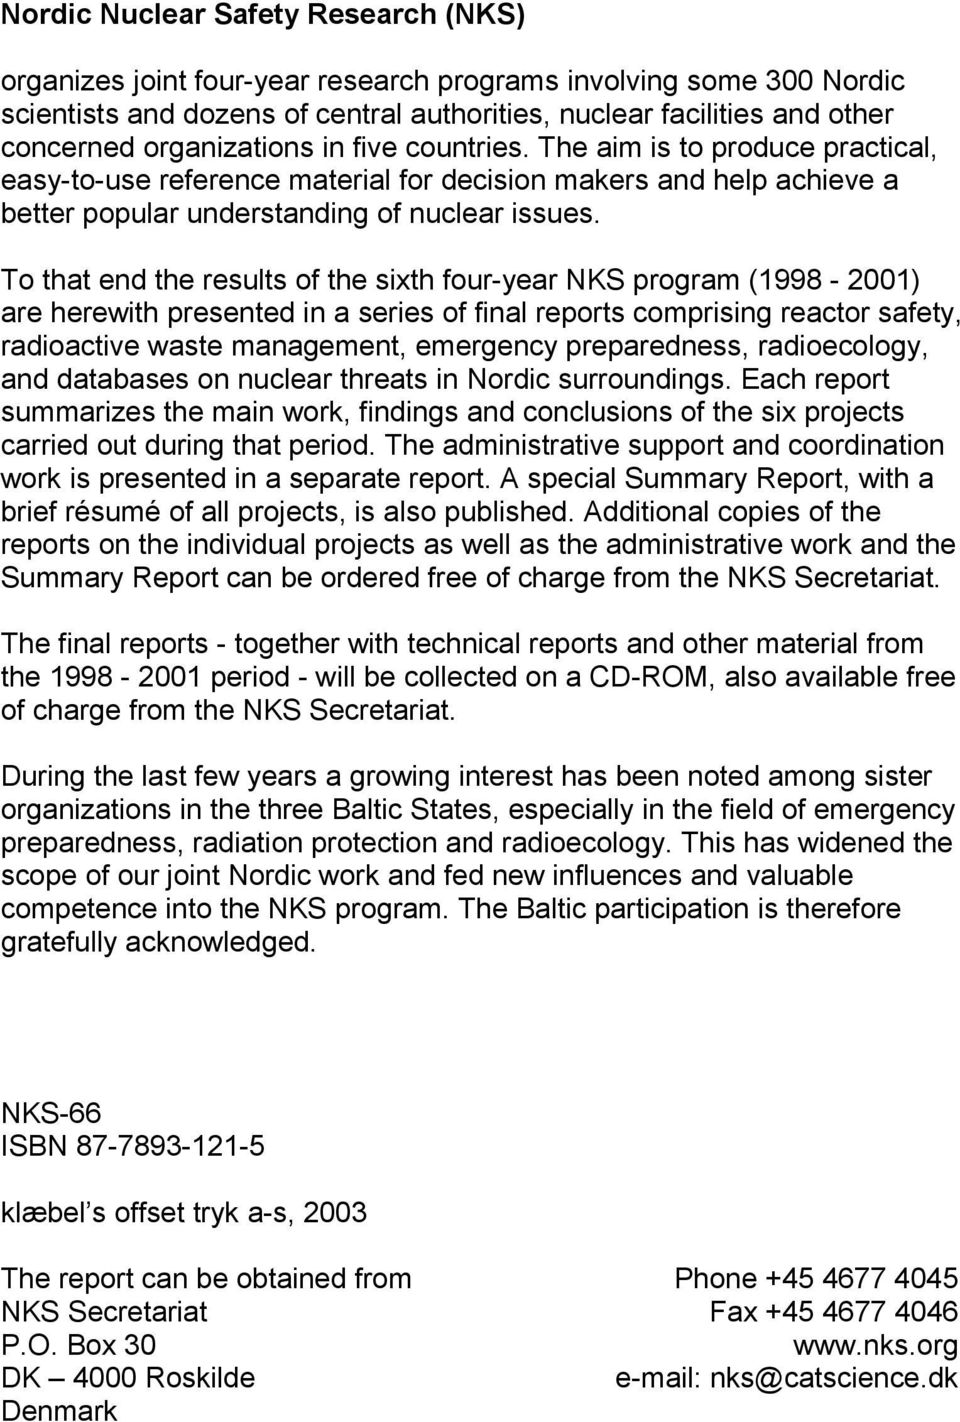 To that end the results of the sixth four-year NKS program (1998-2001) are herewith presented in a series of final reports comprising reactor safety, radioactive waste management, emergency